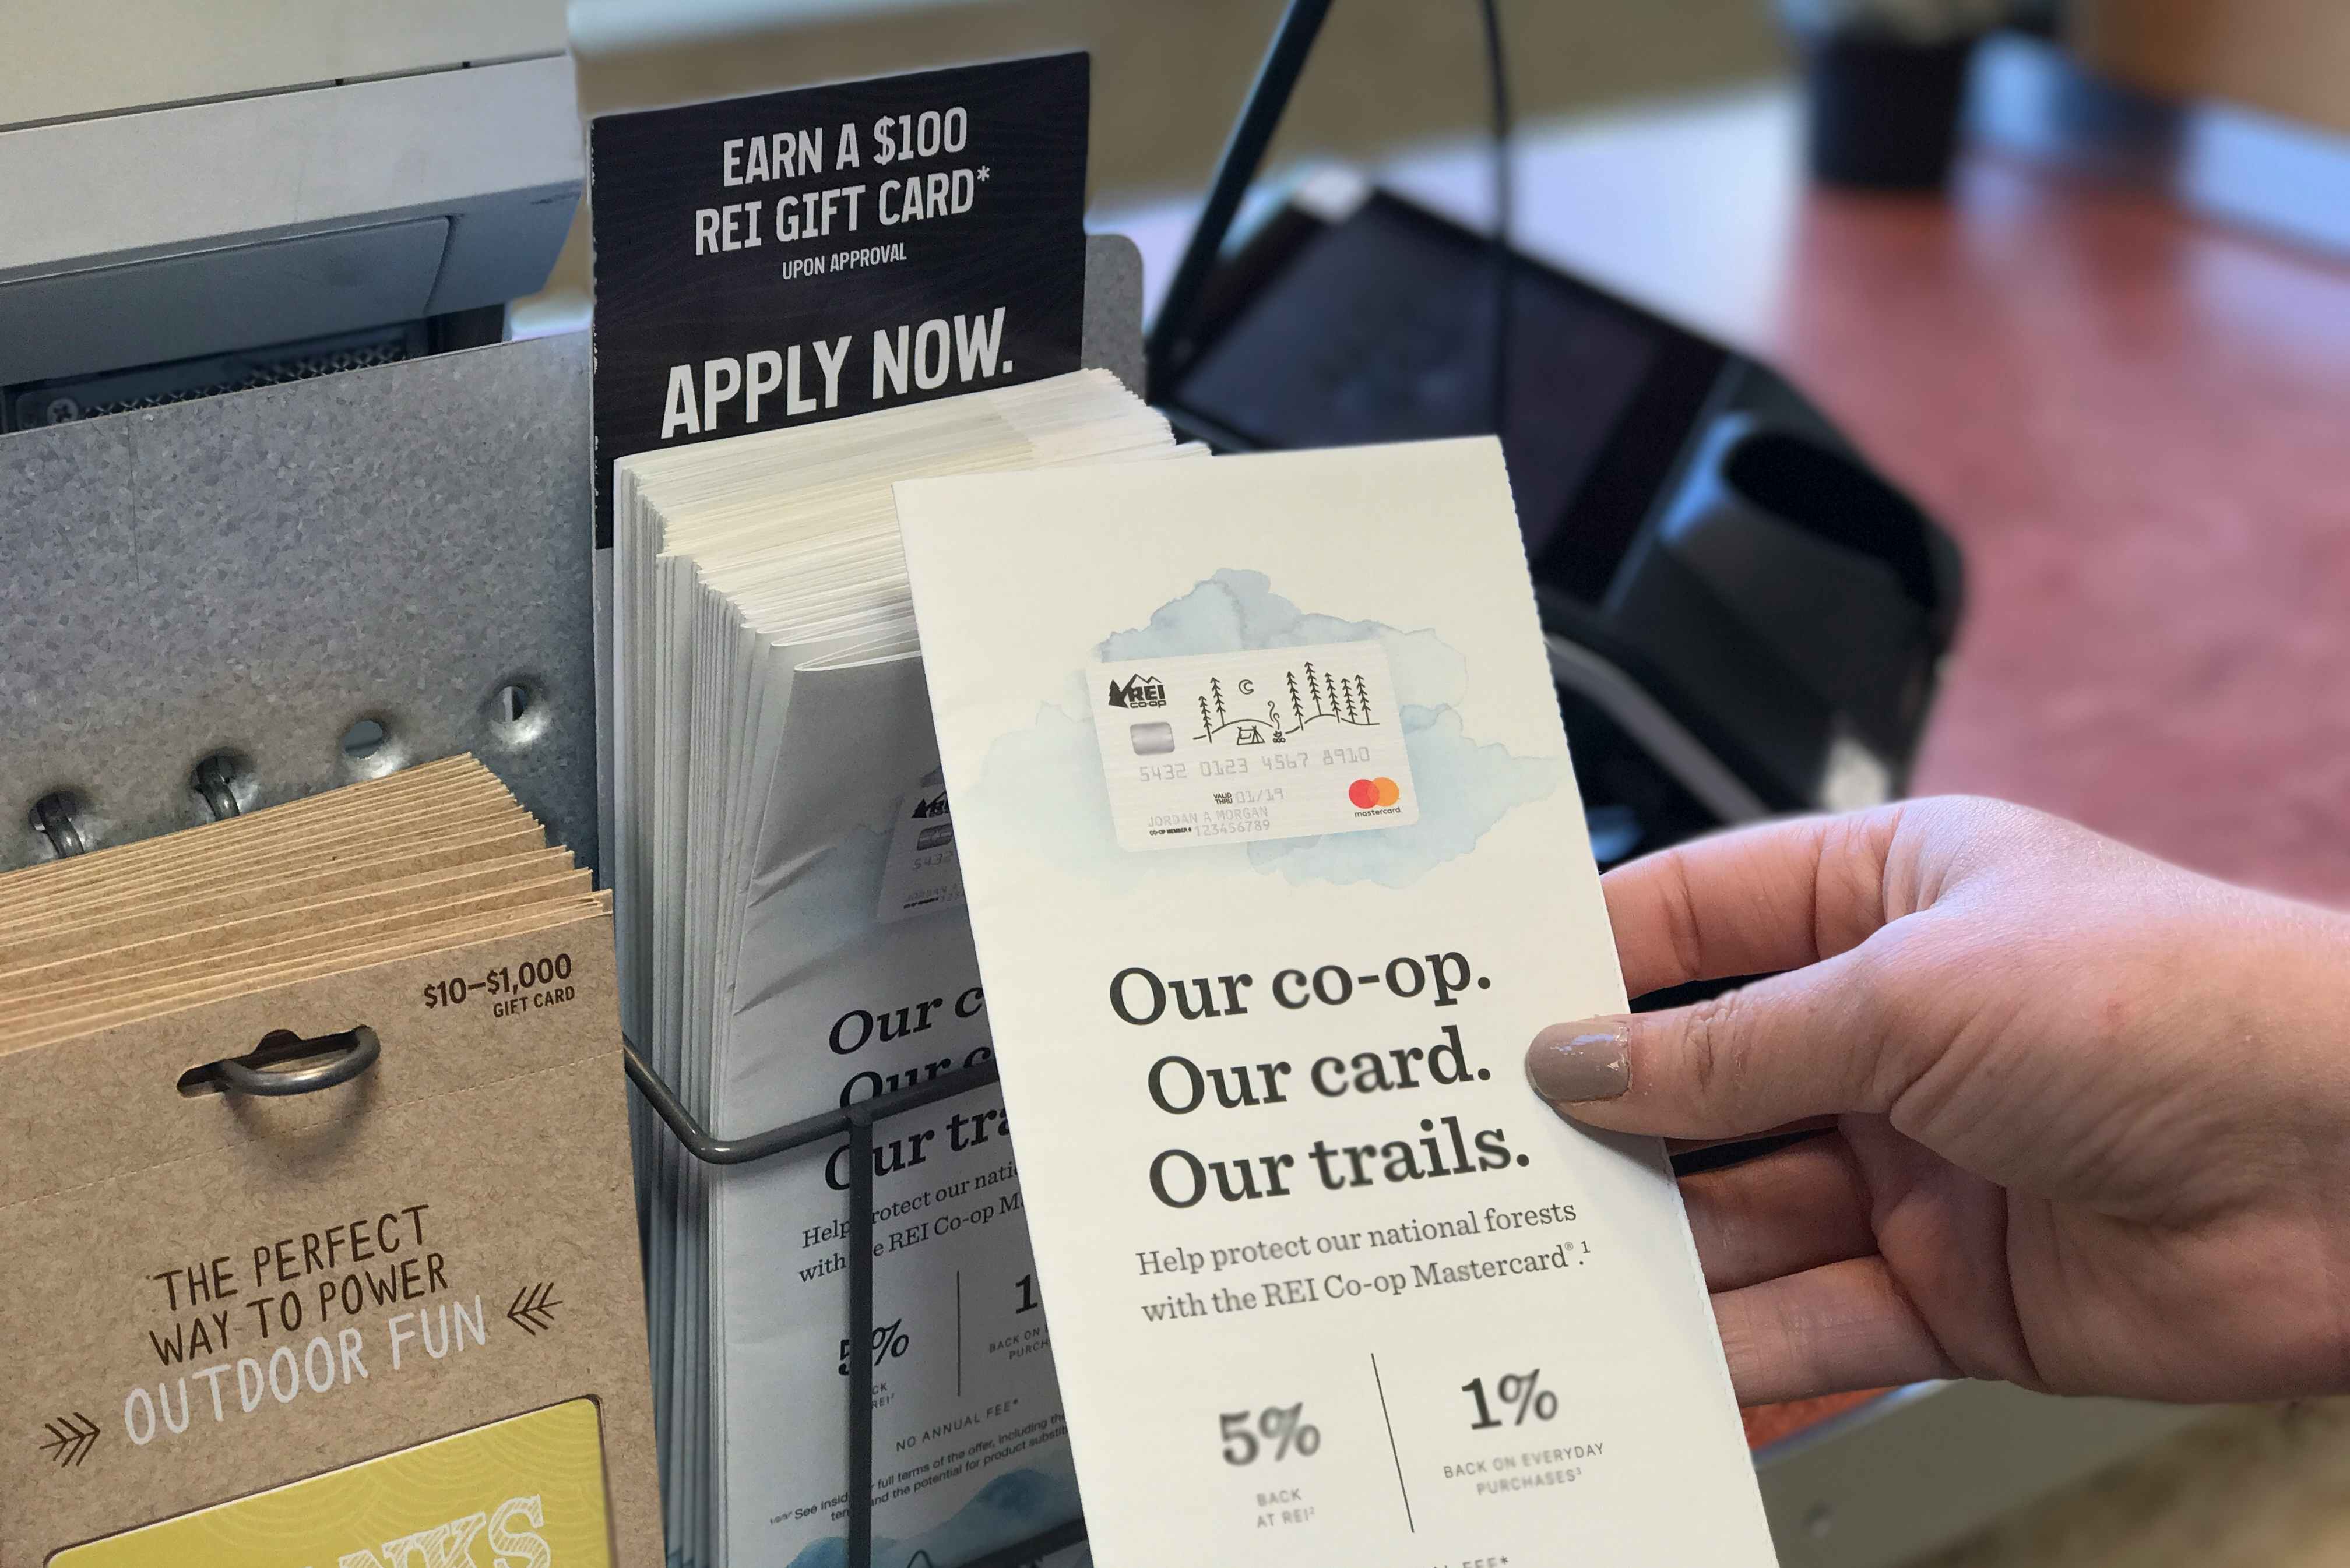 A person's hand taking a brochure for the REI credit card from a display at the REI checkout counter.